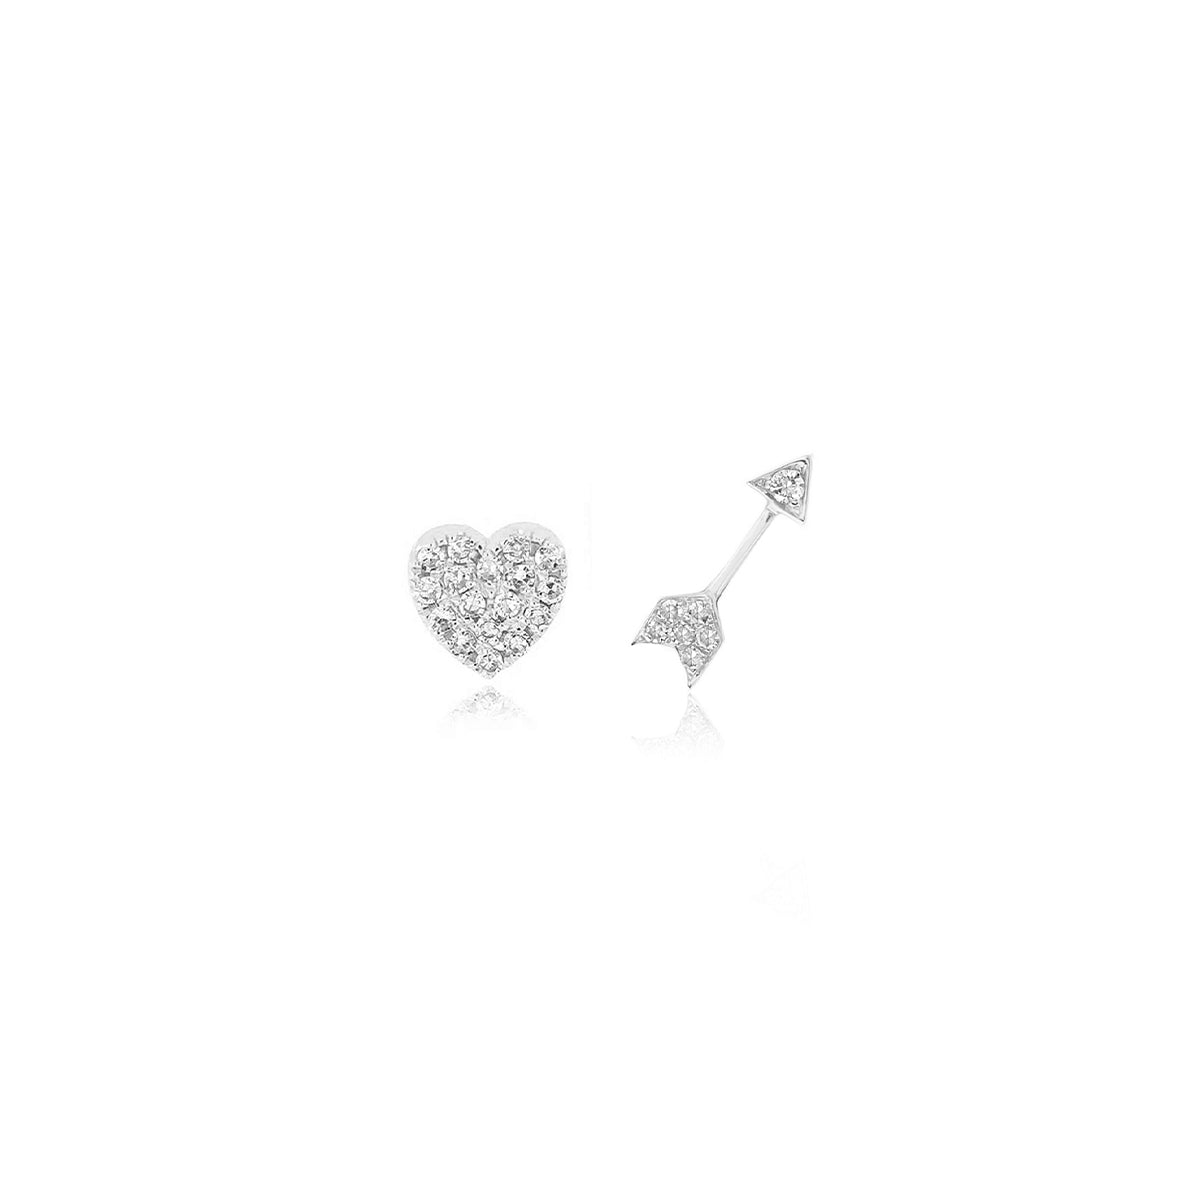 The Love Set in 14k white gold with 1 heart earring and 1 arrow earring